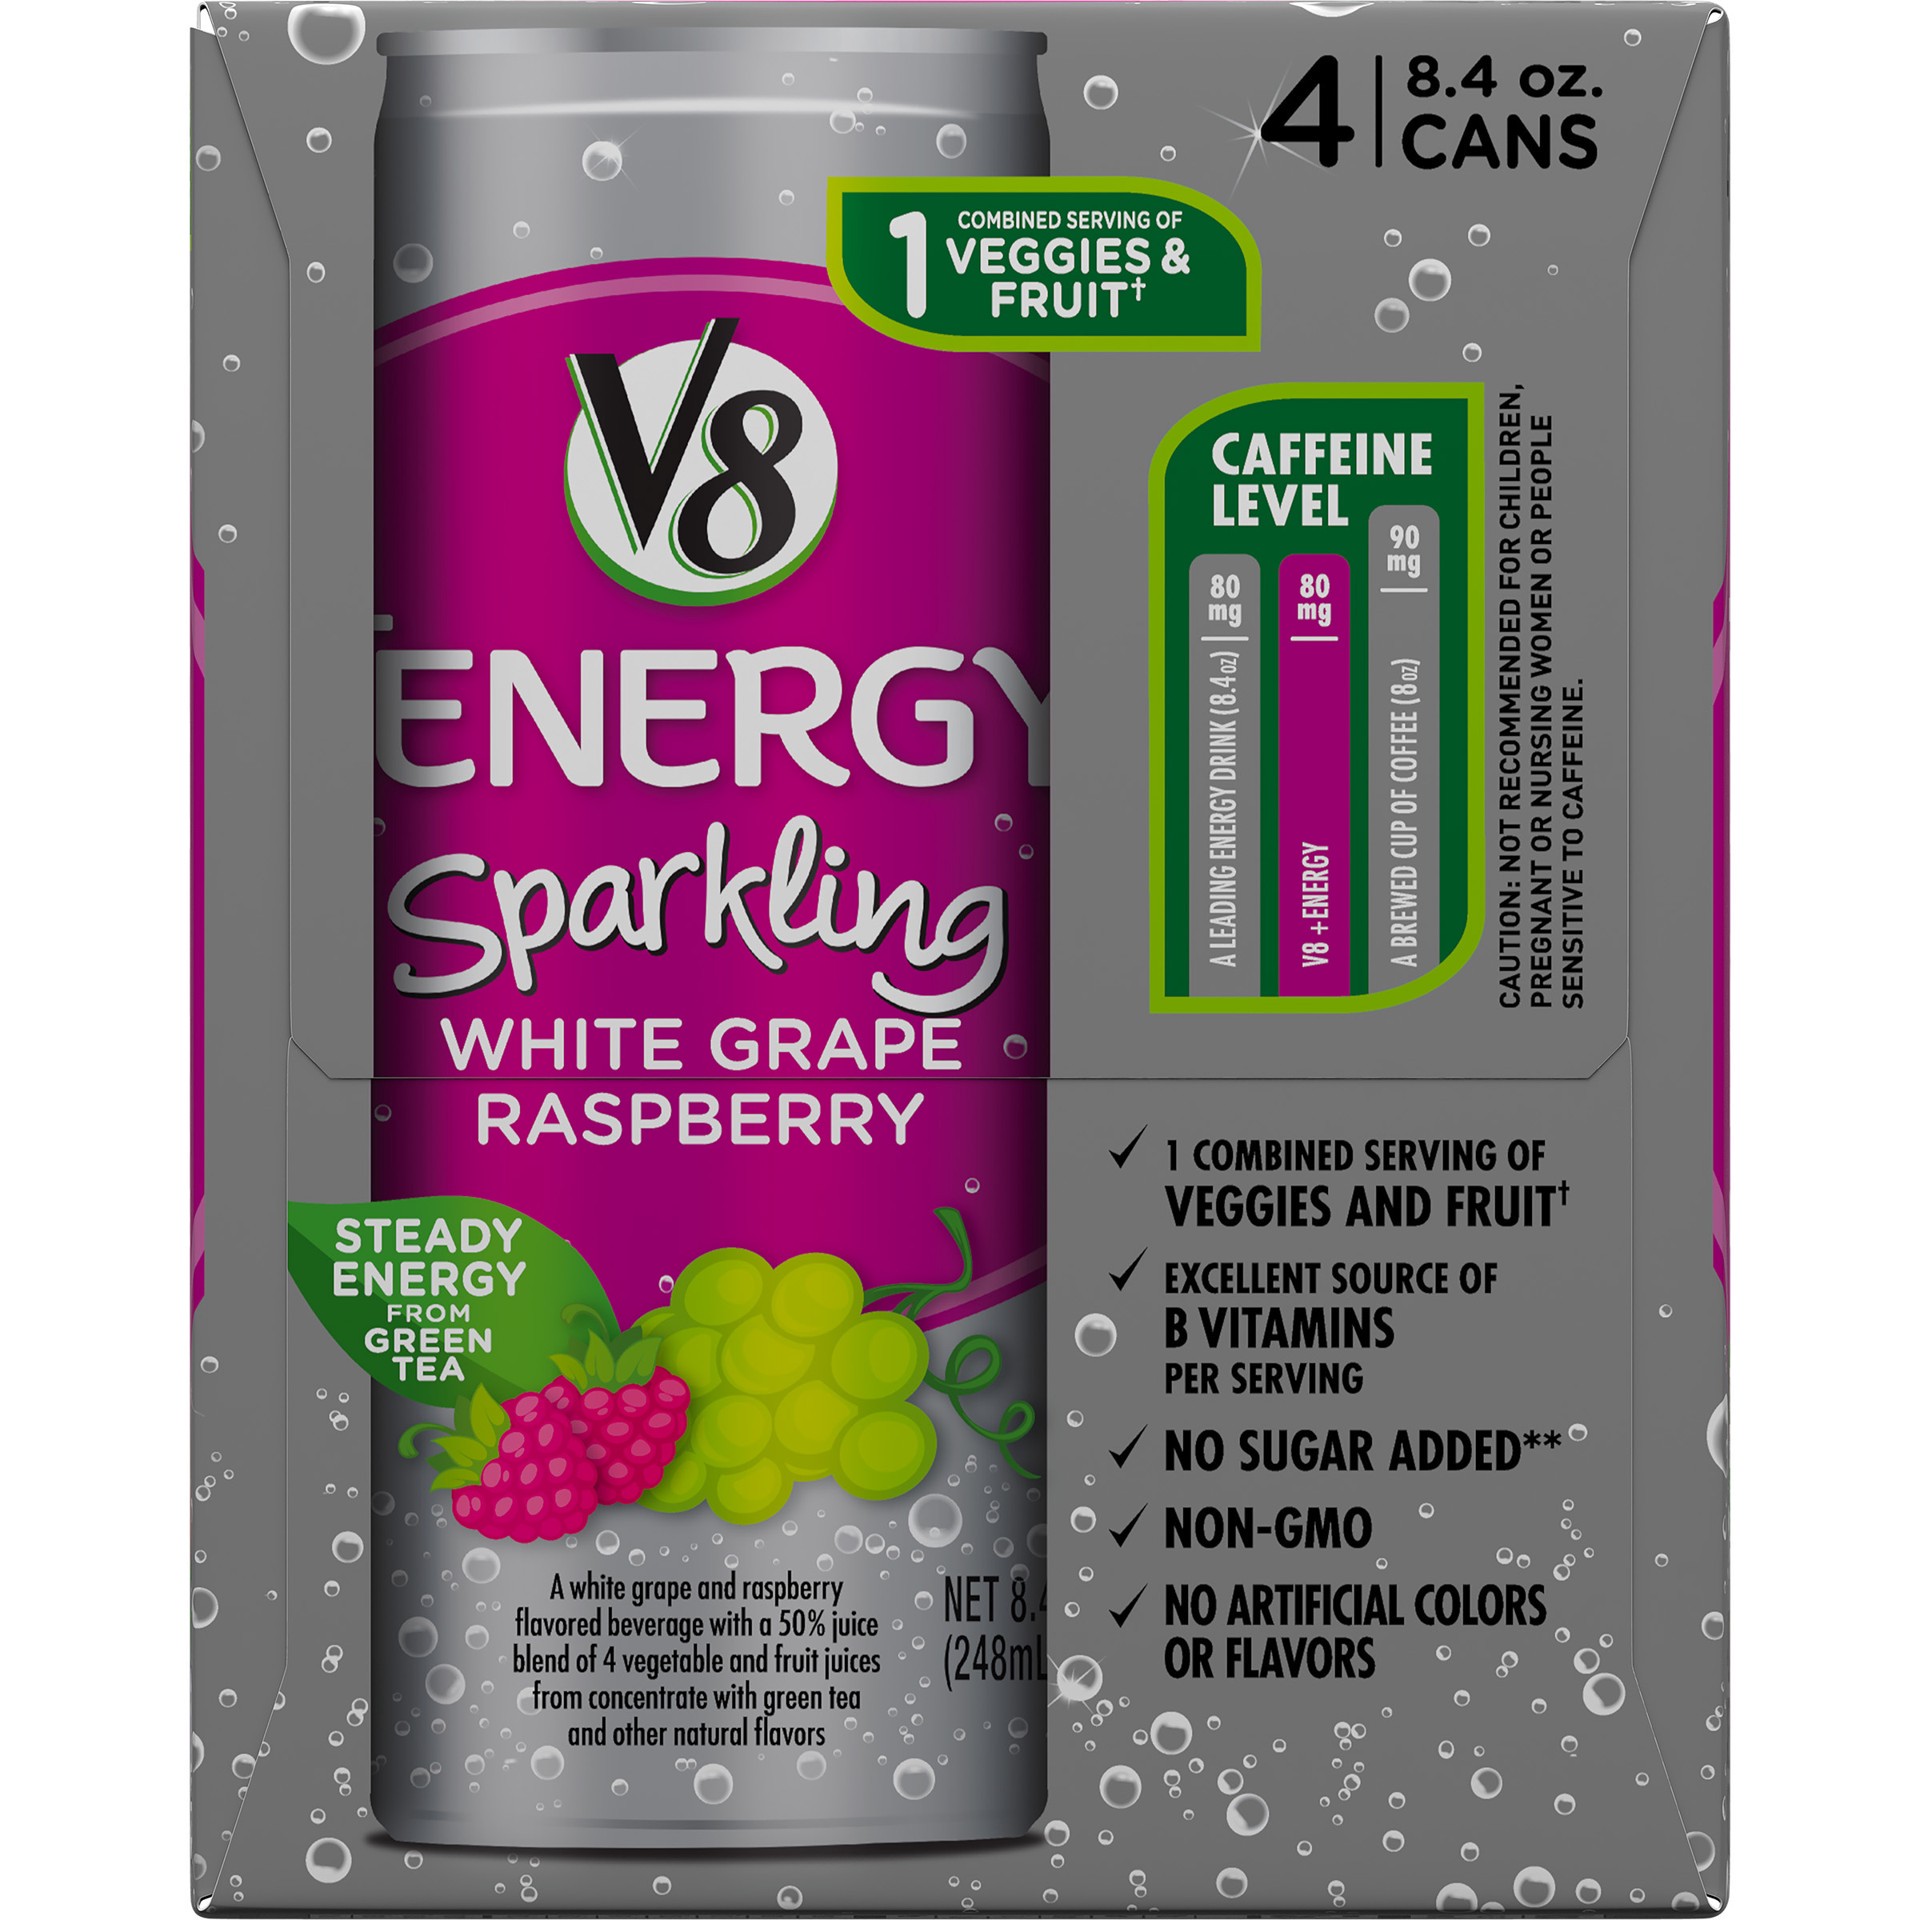 slide 3 of 5, V8 +Energy Sparkling Healthy Energy Drink, Natural Energy from Tea, White Grape Raspberry, 8.4 Oz Can (4 Count), 33.6 oz